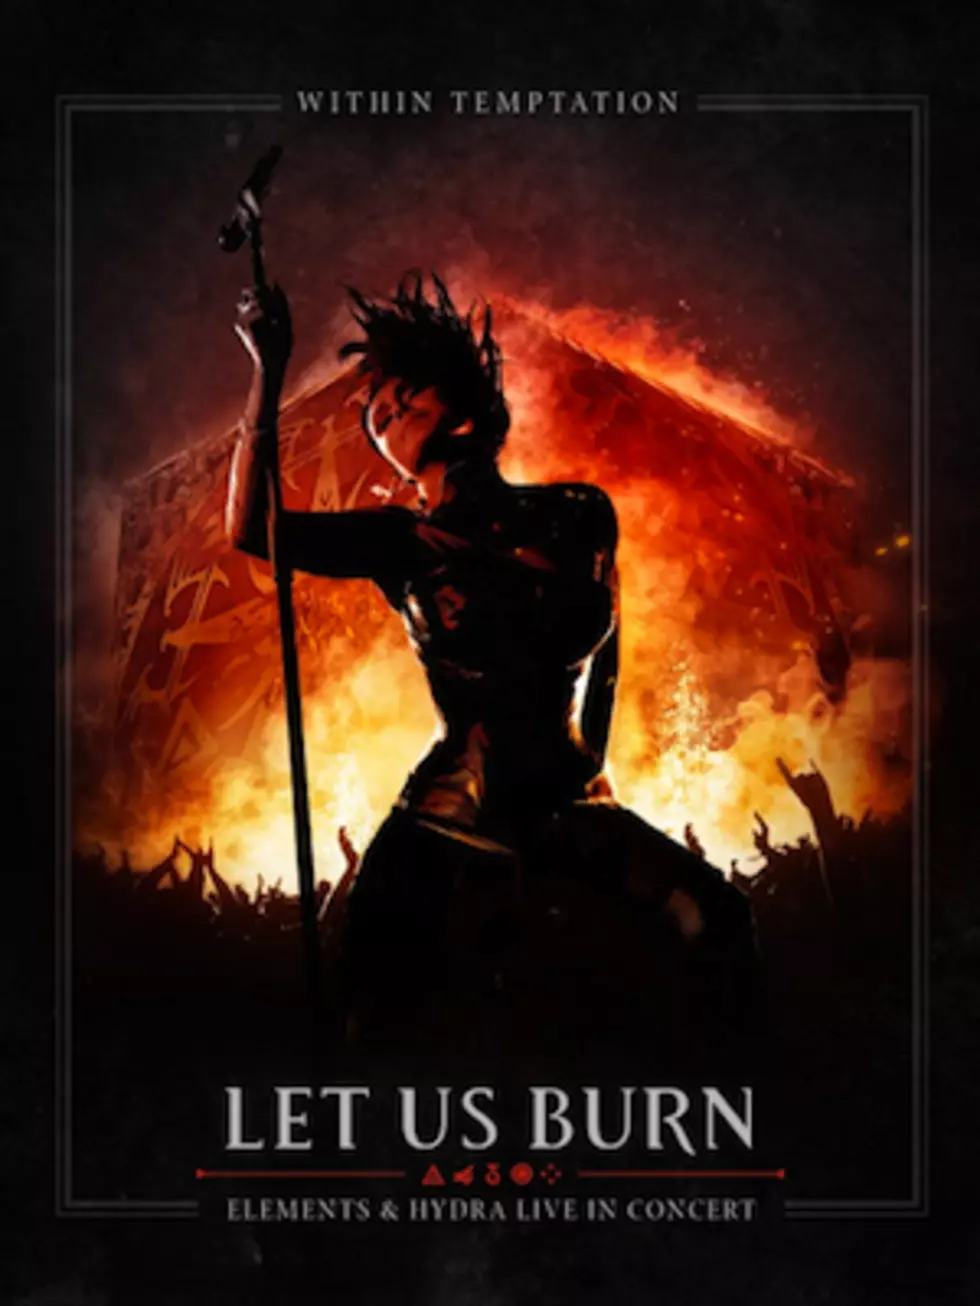 Within Temptation Revisit &#8216;Elements&#8217; + &#8216;Hydra&#8217; With ‘Let Us Burn’ Concert DVD